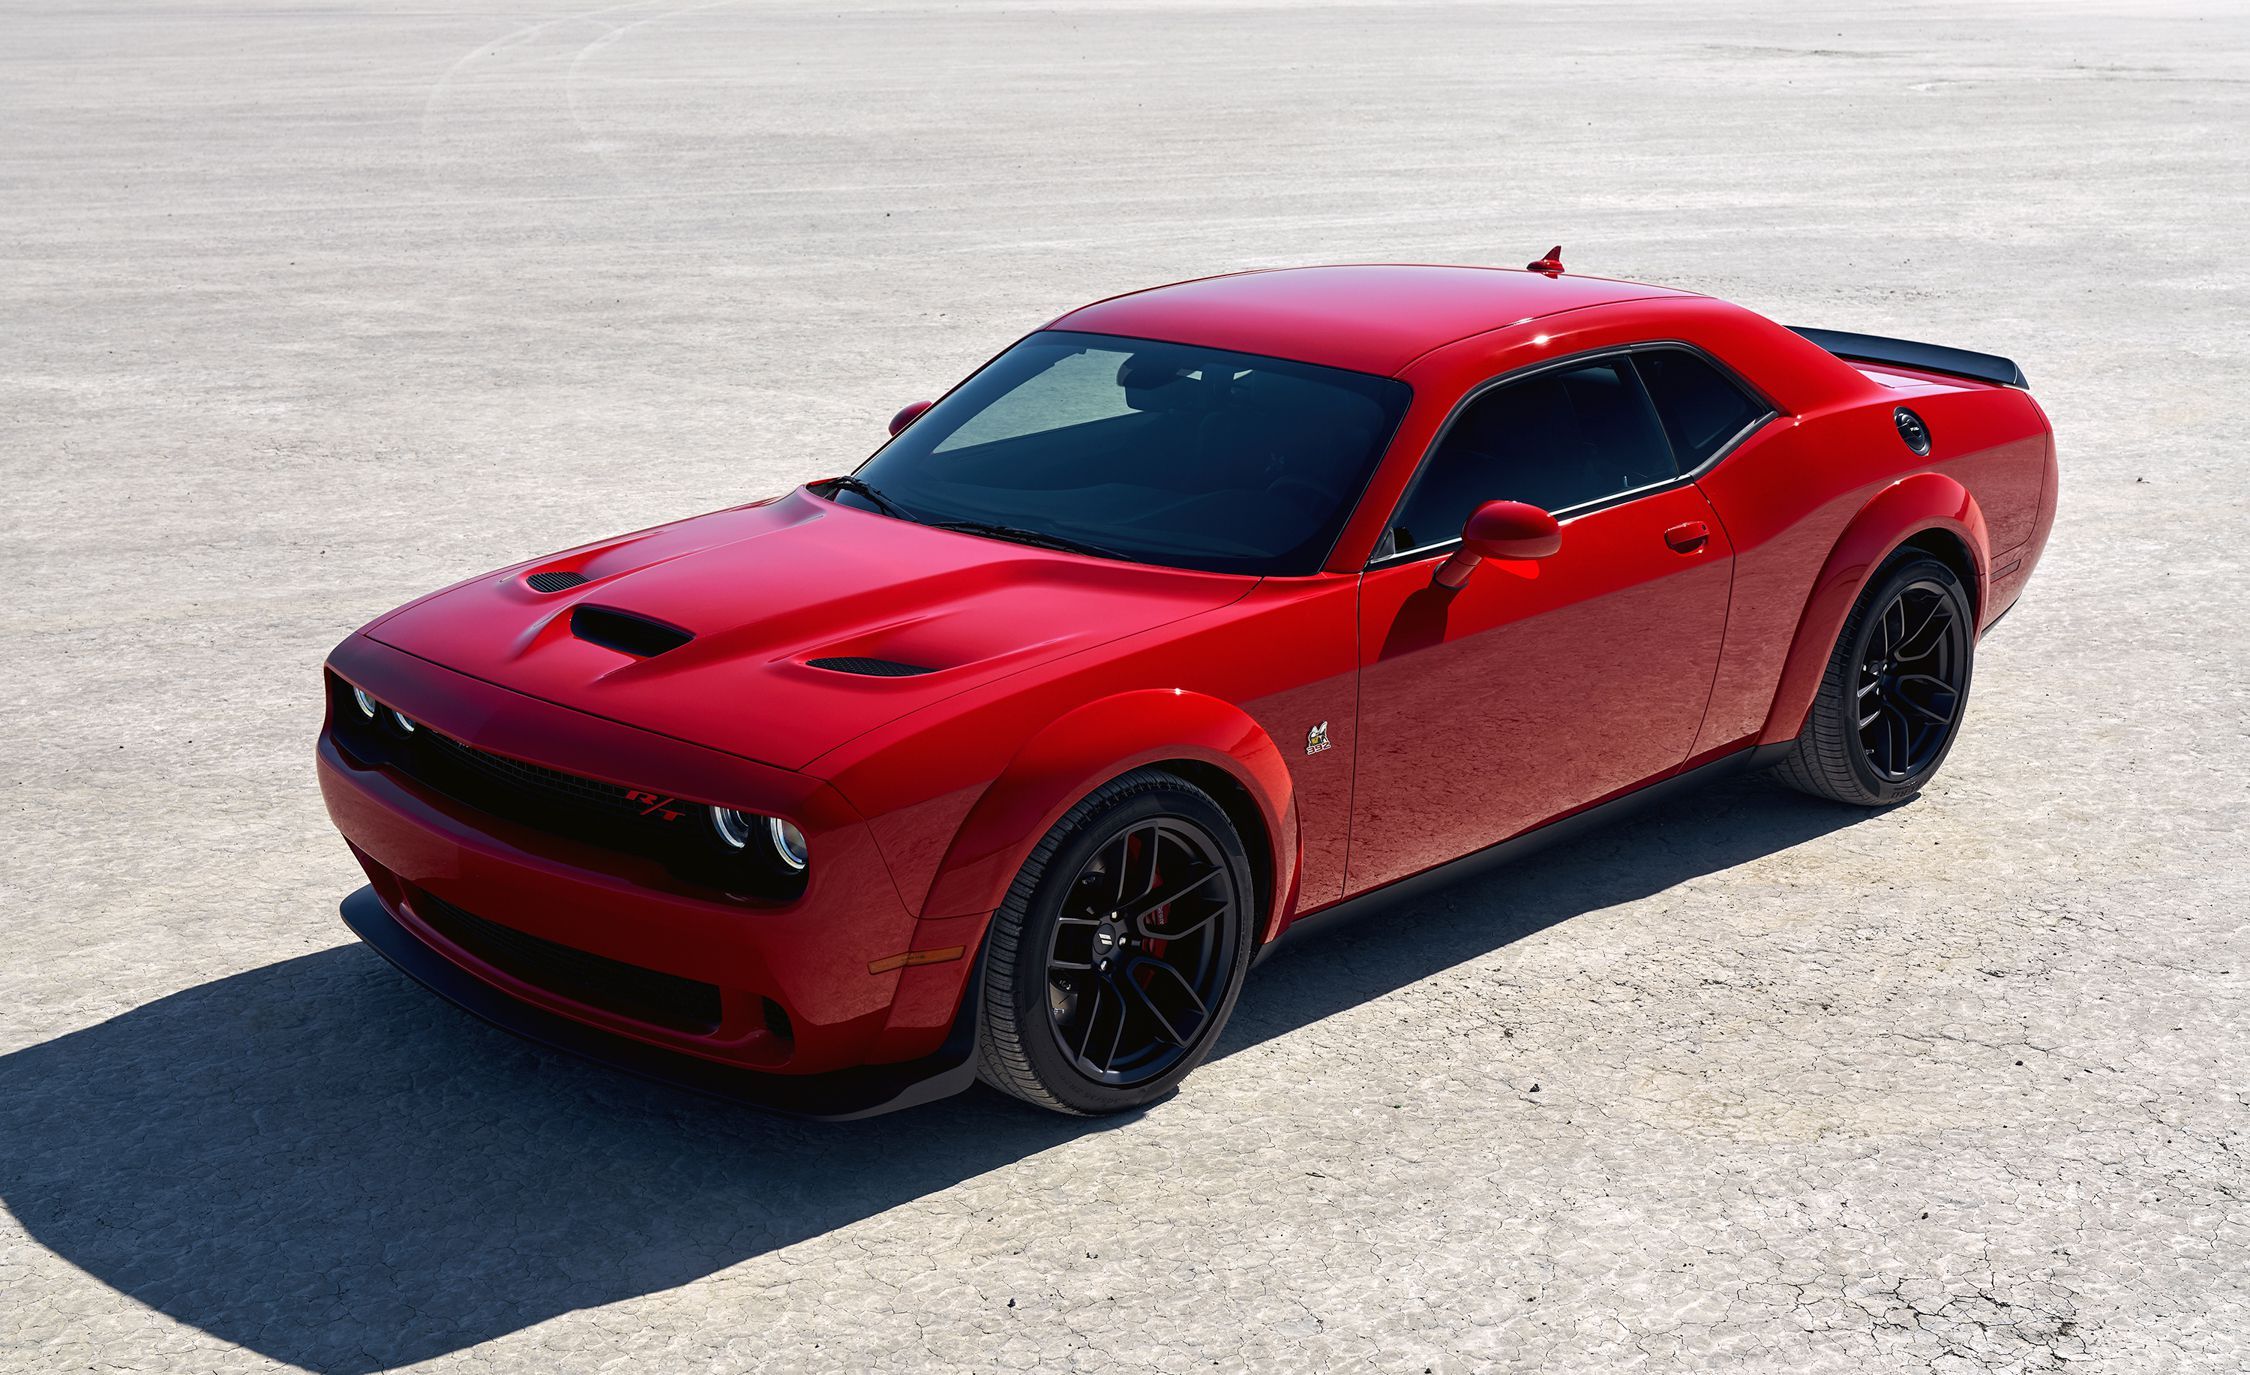 Exert Zeal give 2019 Dodge Challenger Review, Pricing, and Specs